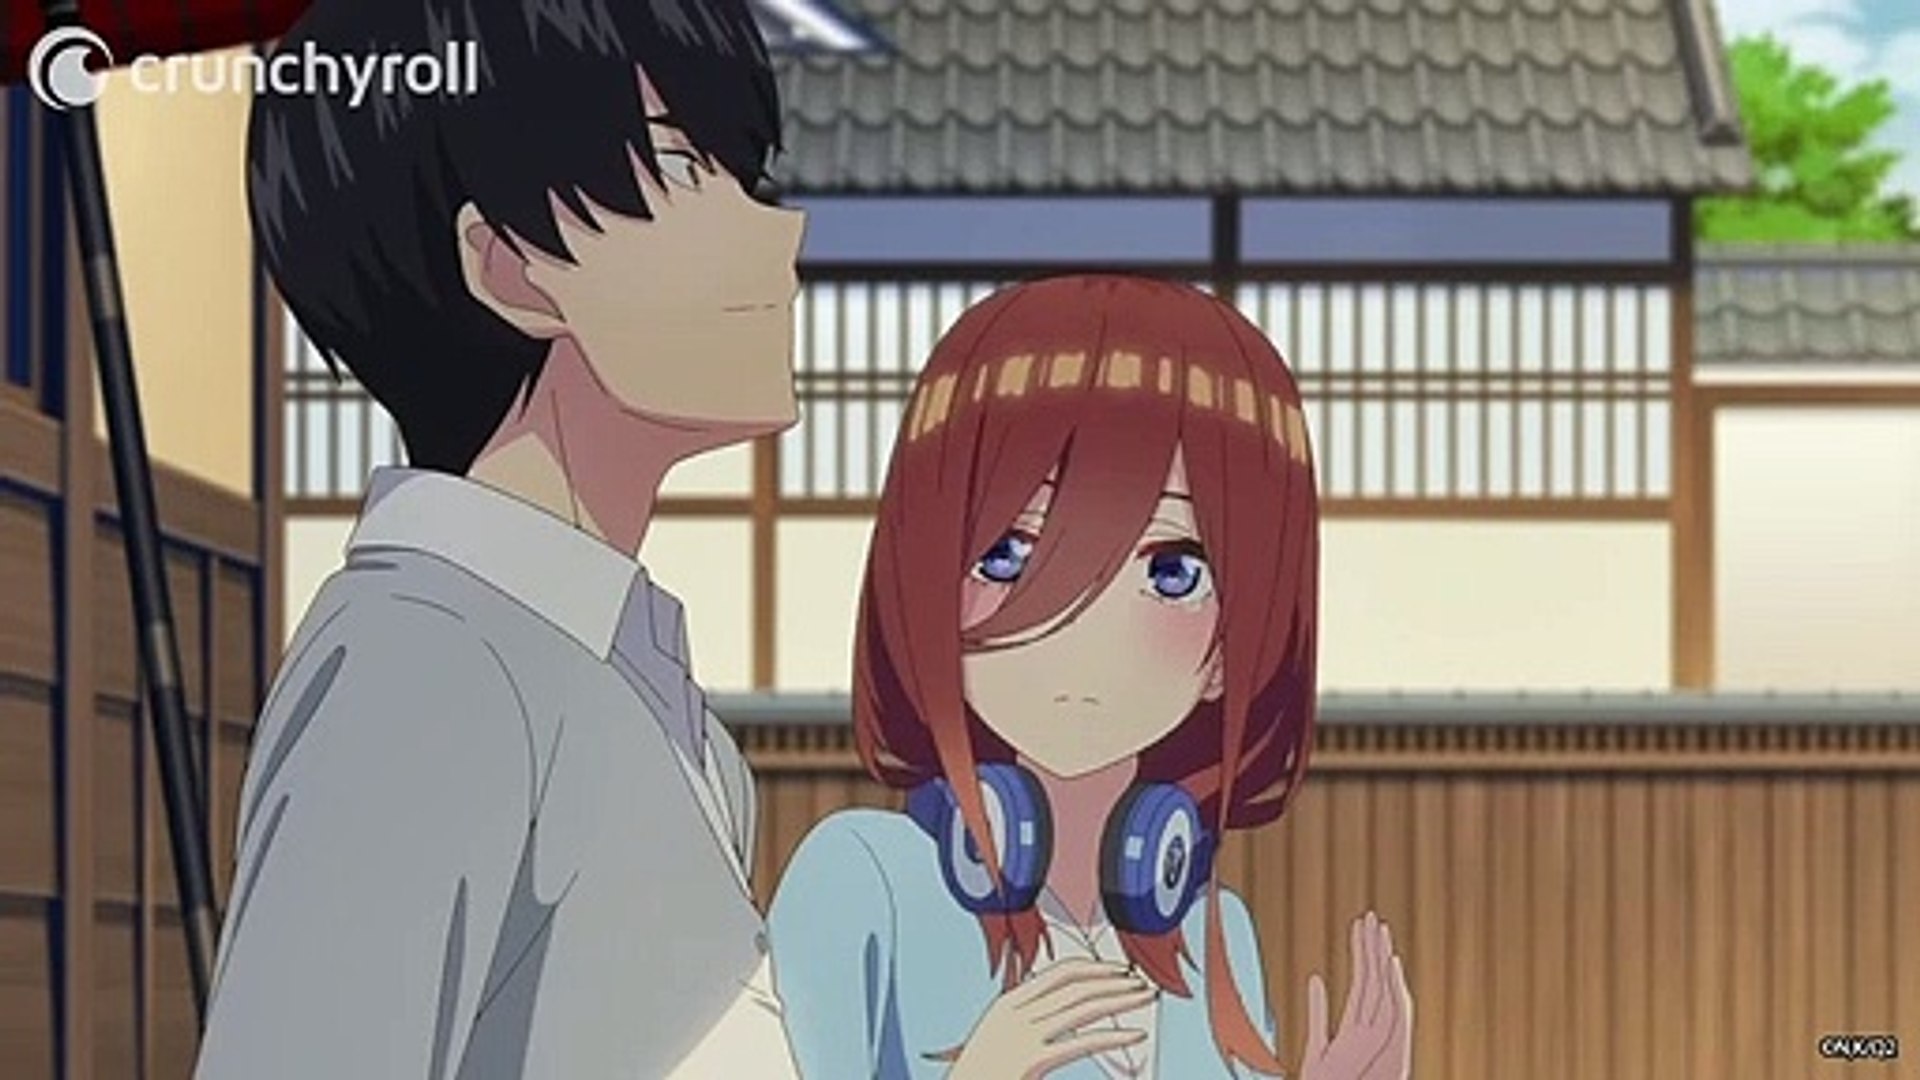 The Quintessential Quintuplets EP 1 ENG SUB - Dailymotion Video